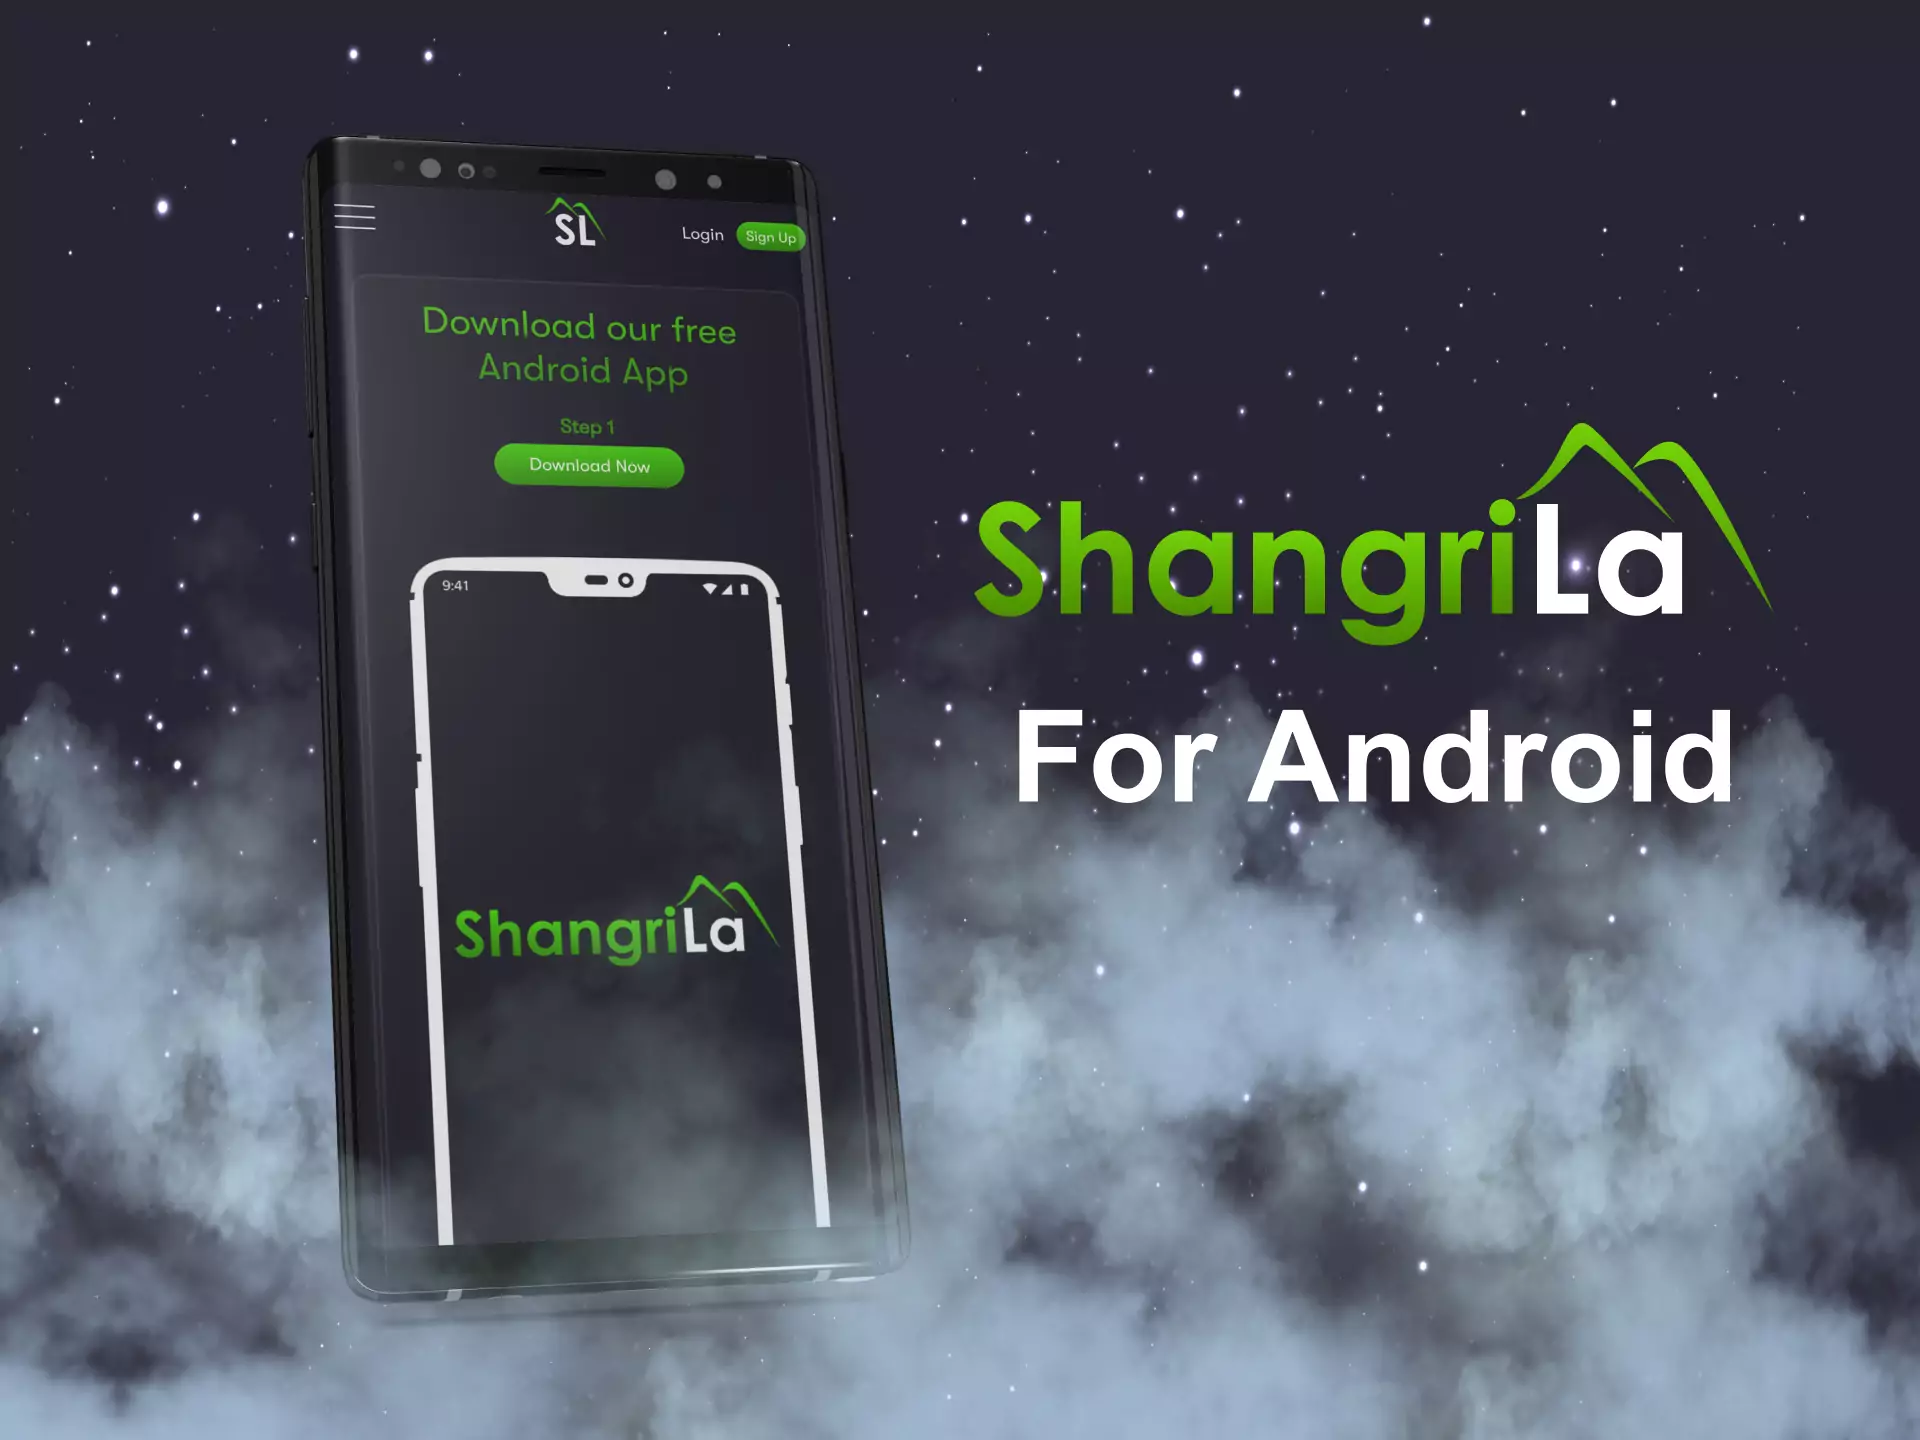 Shangri-La doesn't have an app for Android, but you can bet on the mobile site.